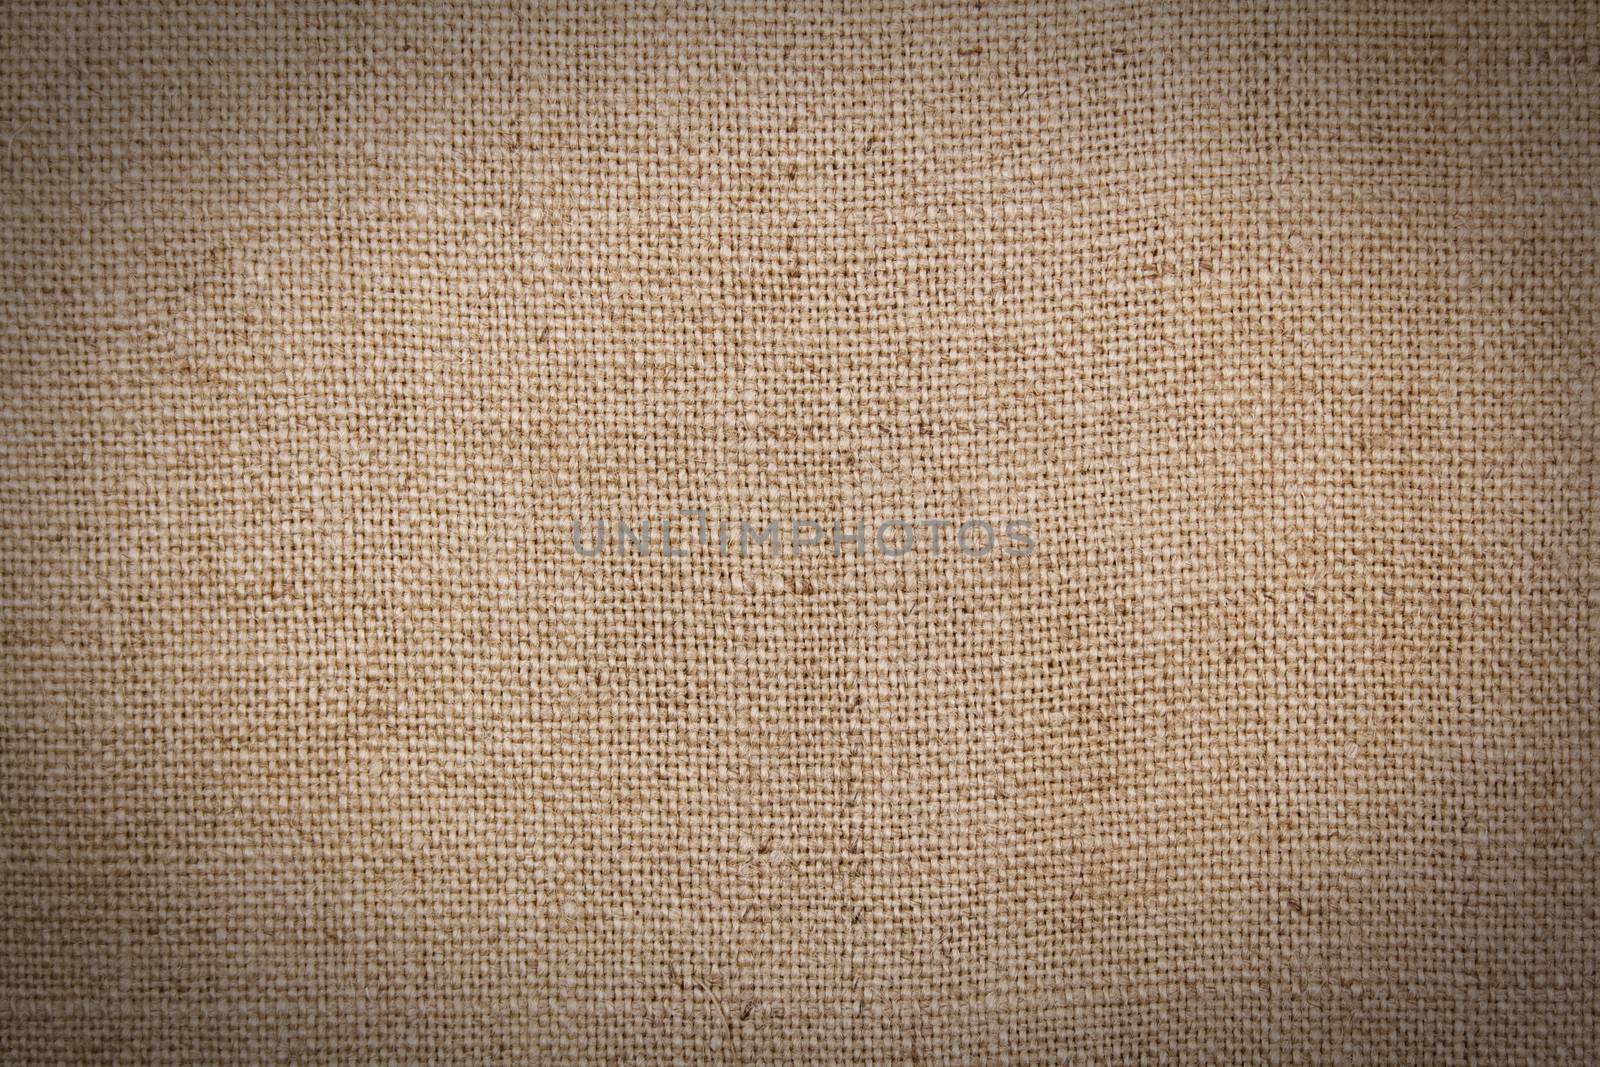 Burlap or sacking texture for the background close up.